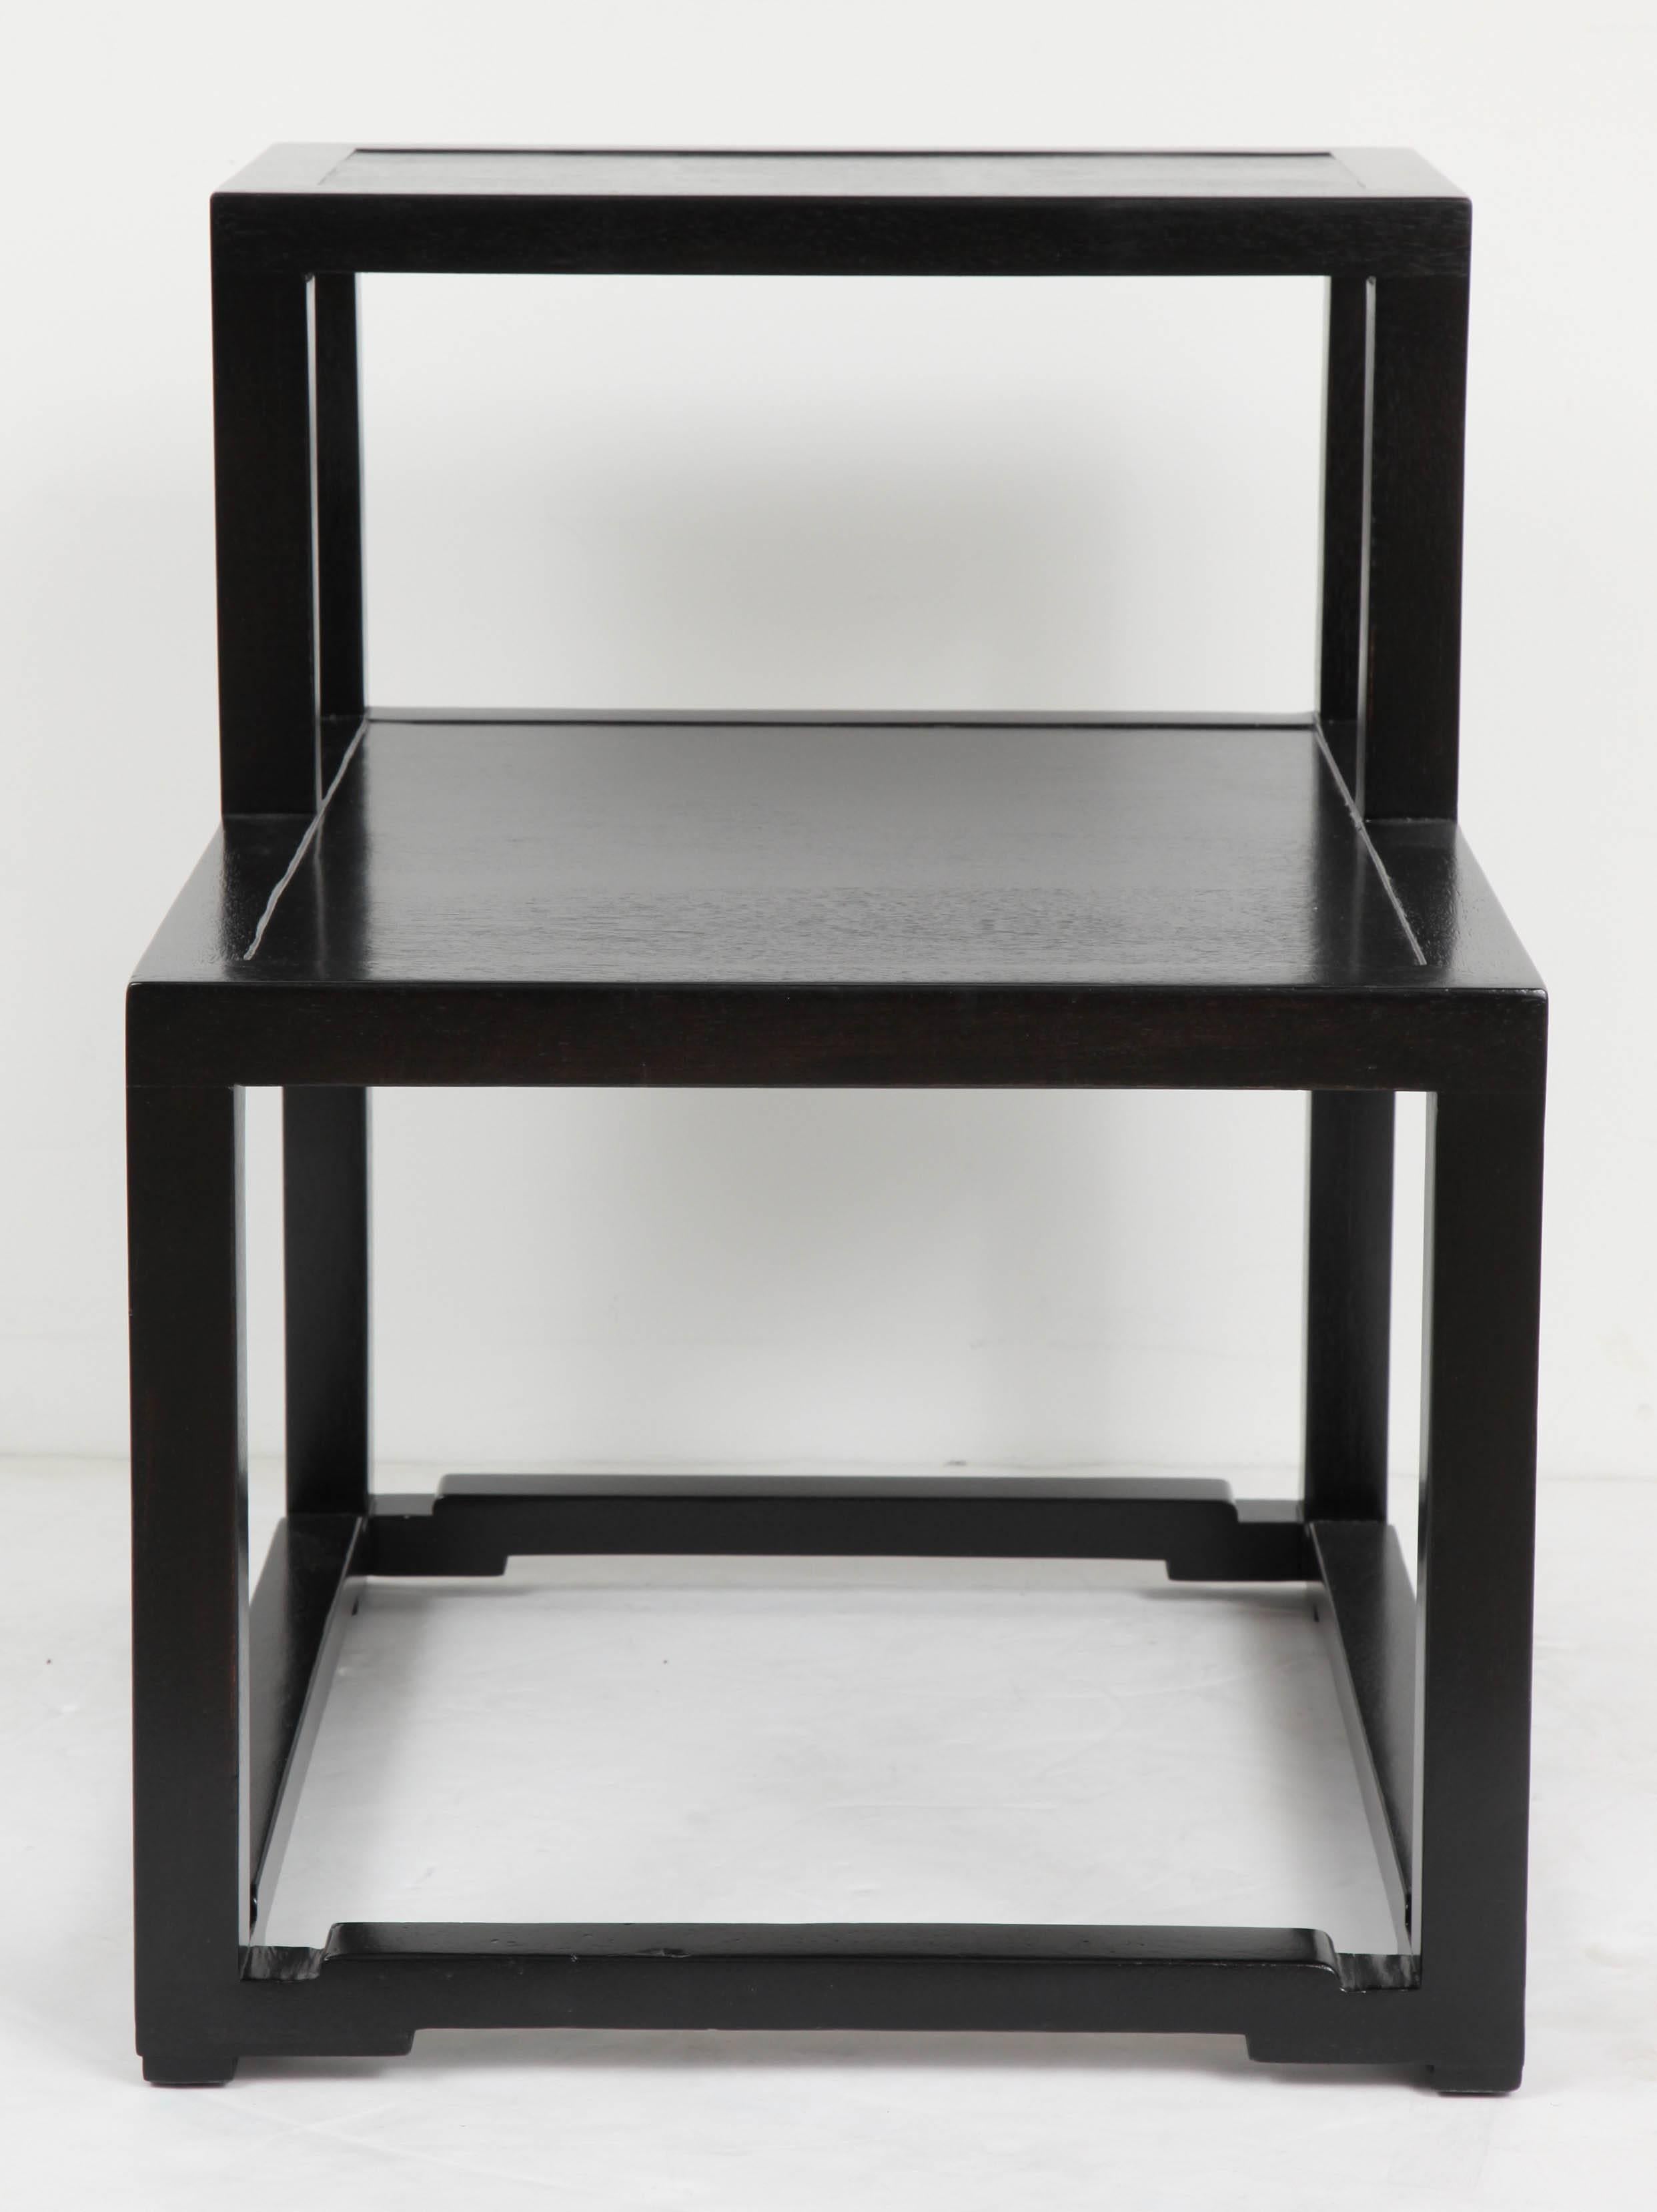 Pair of ebonized mahogany end tables with stepped top and Asian inset detail by Edward Worley for Dunbar.  Signed with stamped mark.  USA, circa 1950.

Dimensions (inches):
Overall 24